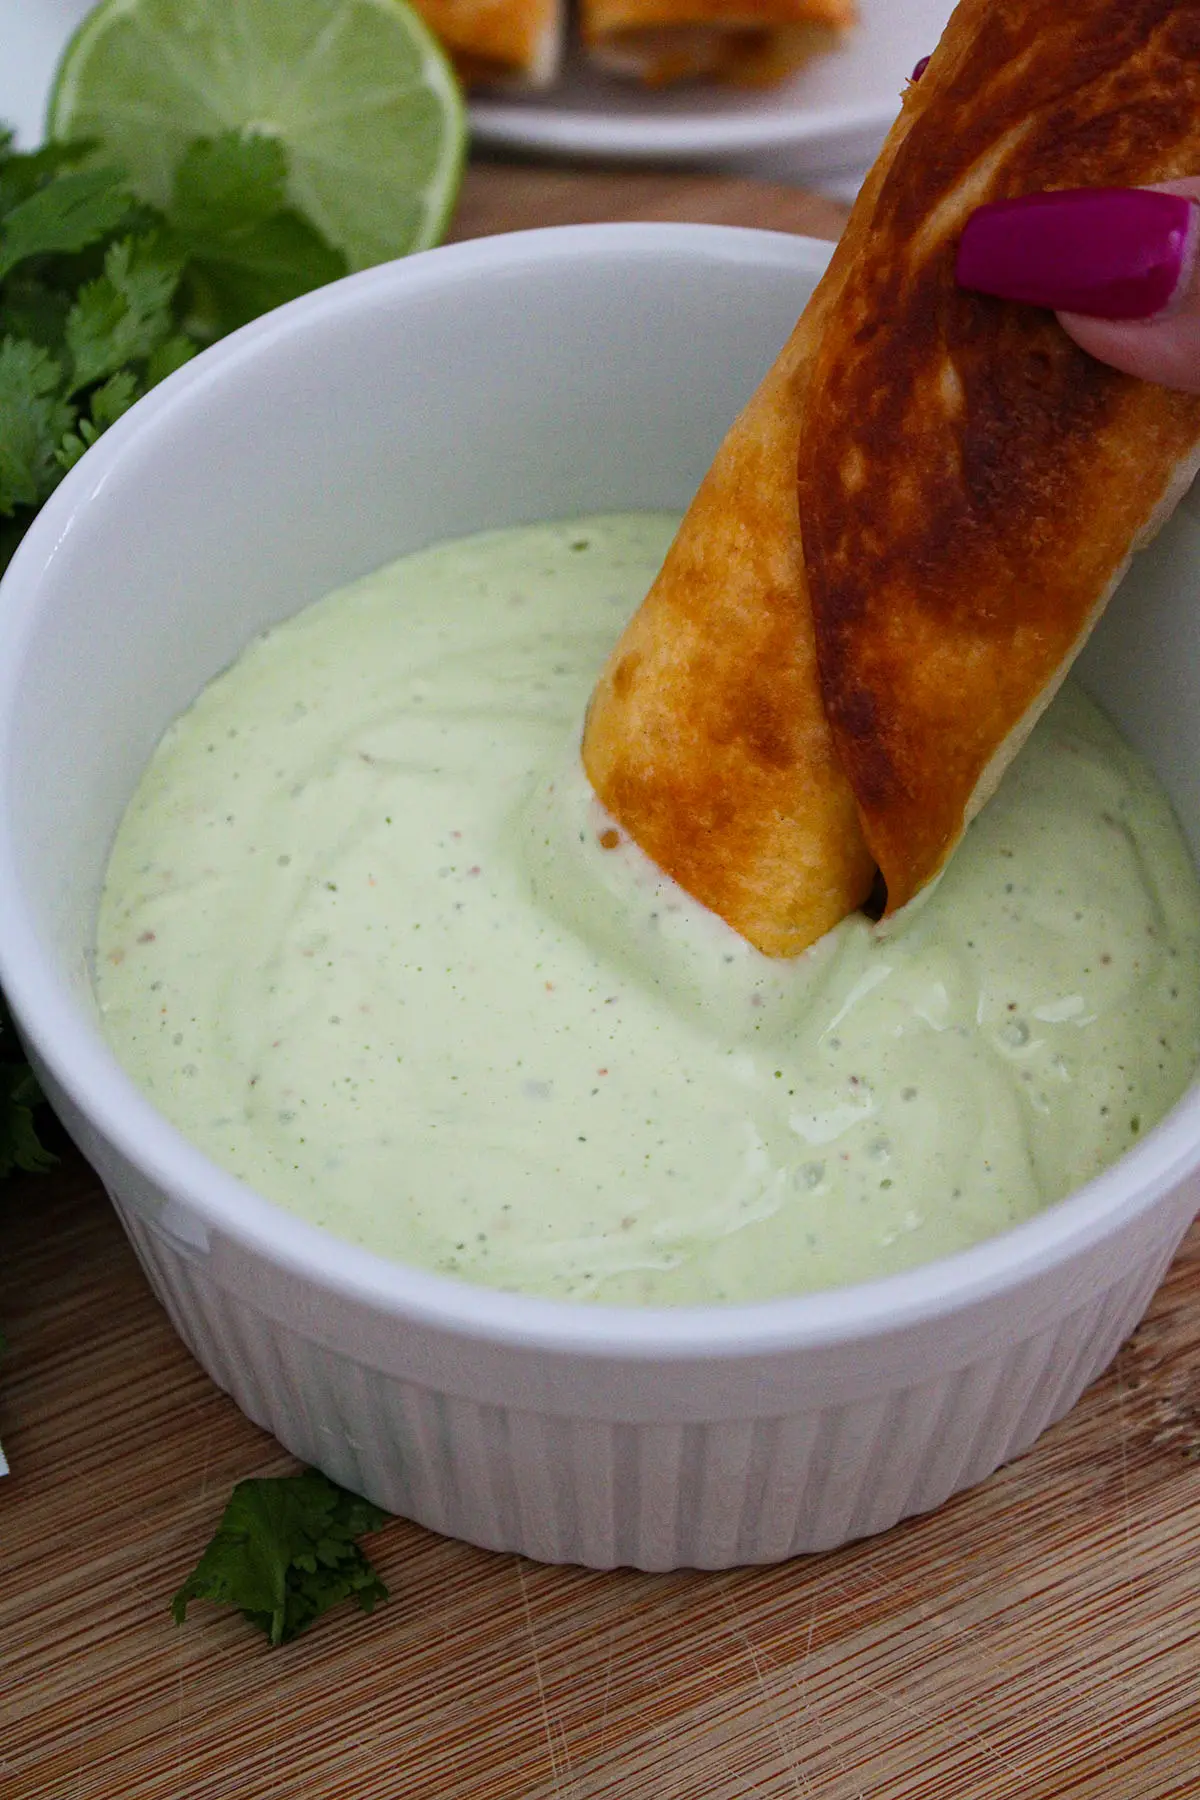 These are serving suggestions for this recipe, dipping taquitos in the sauce